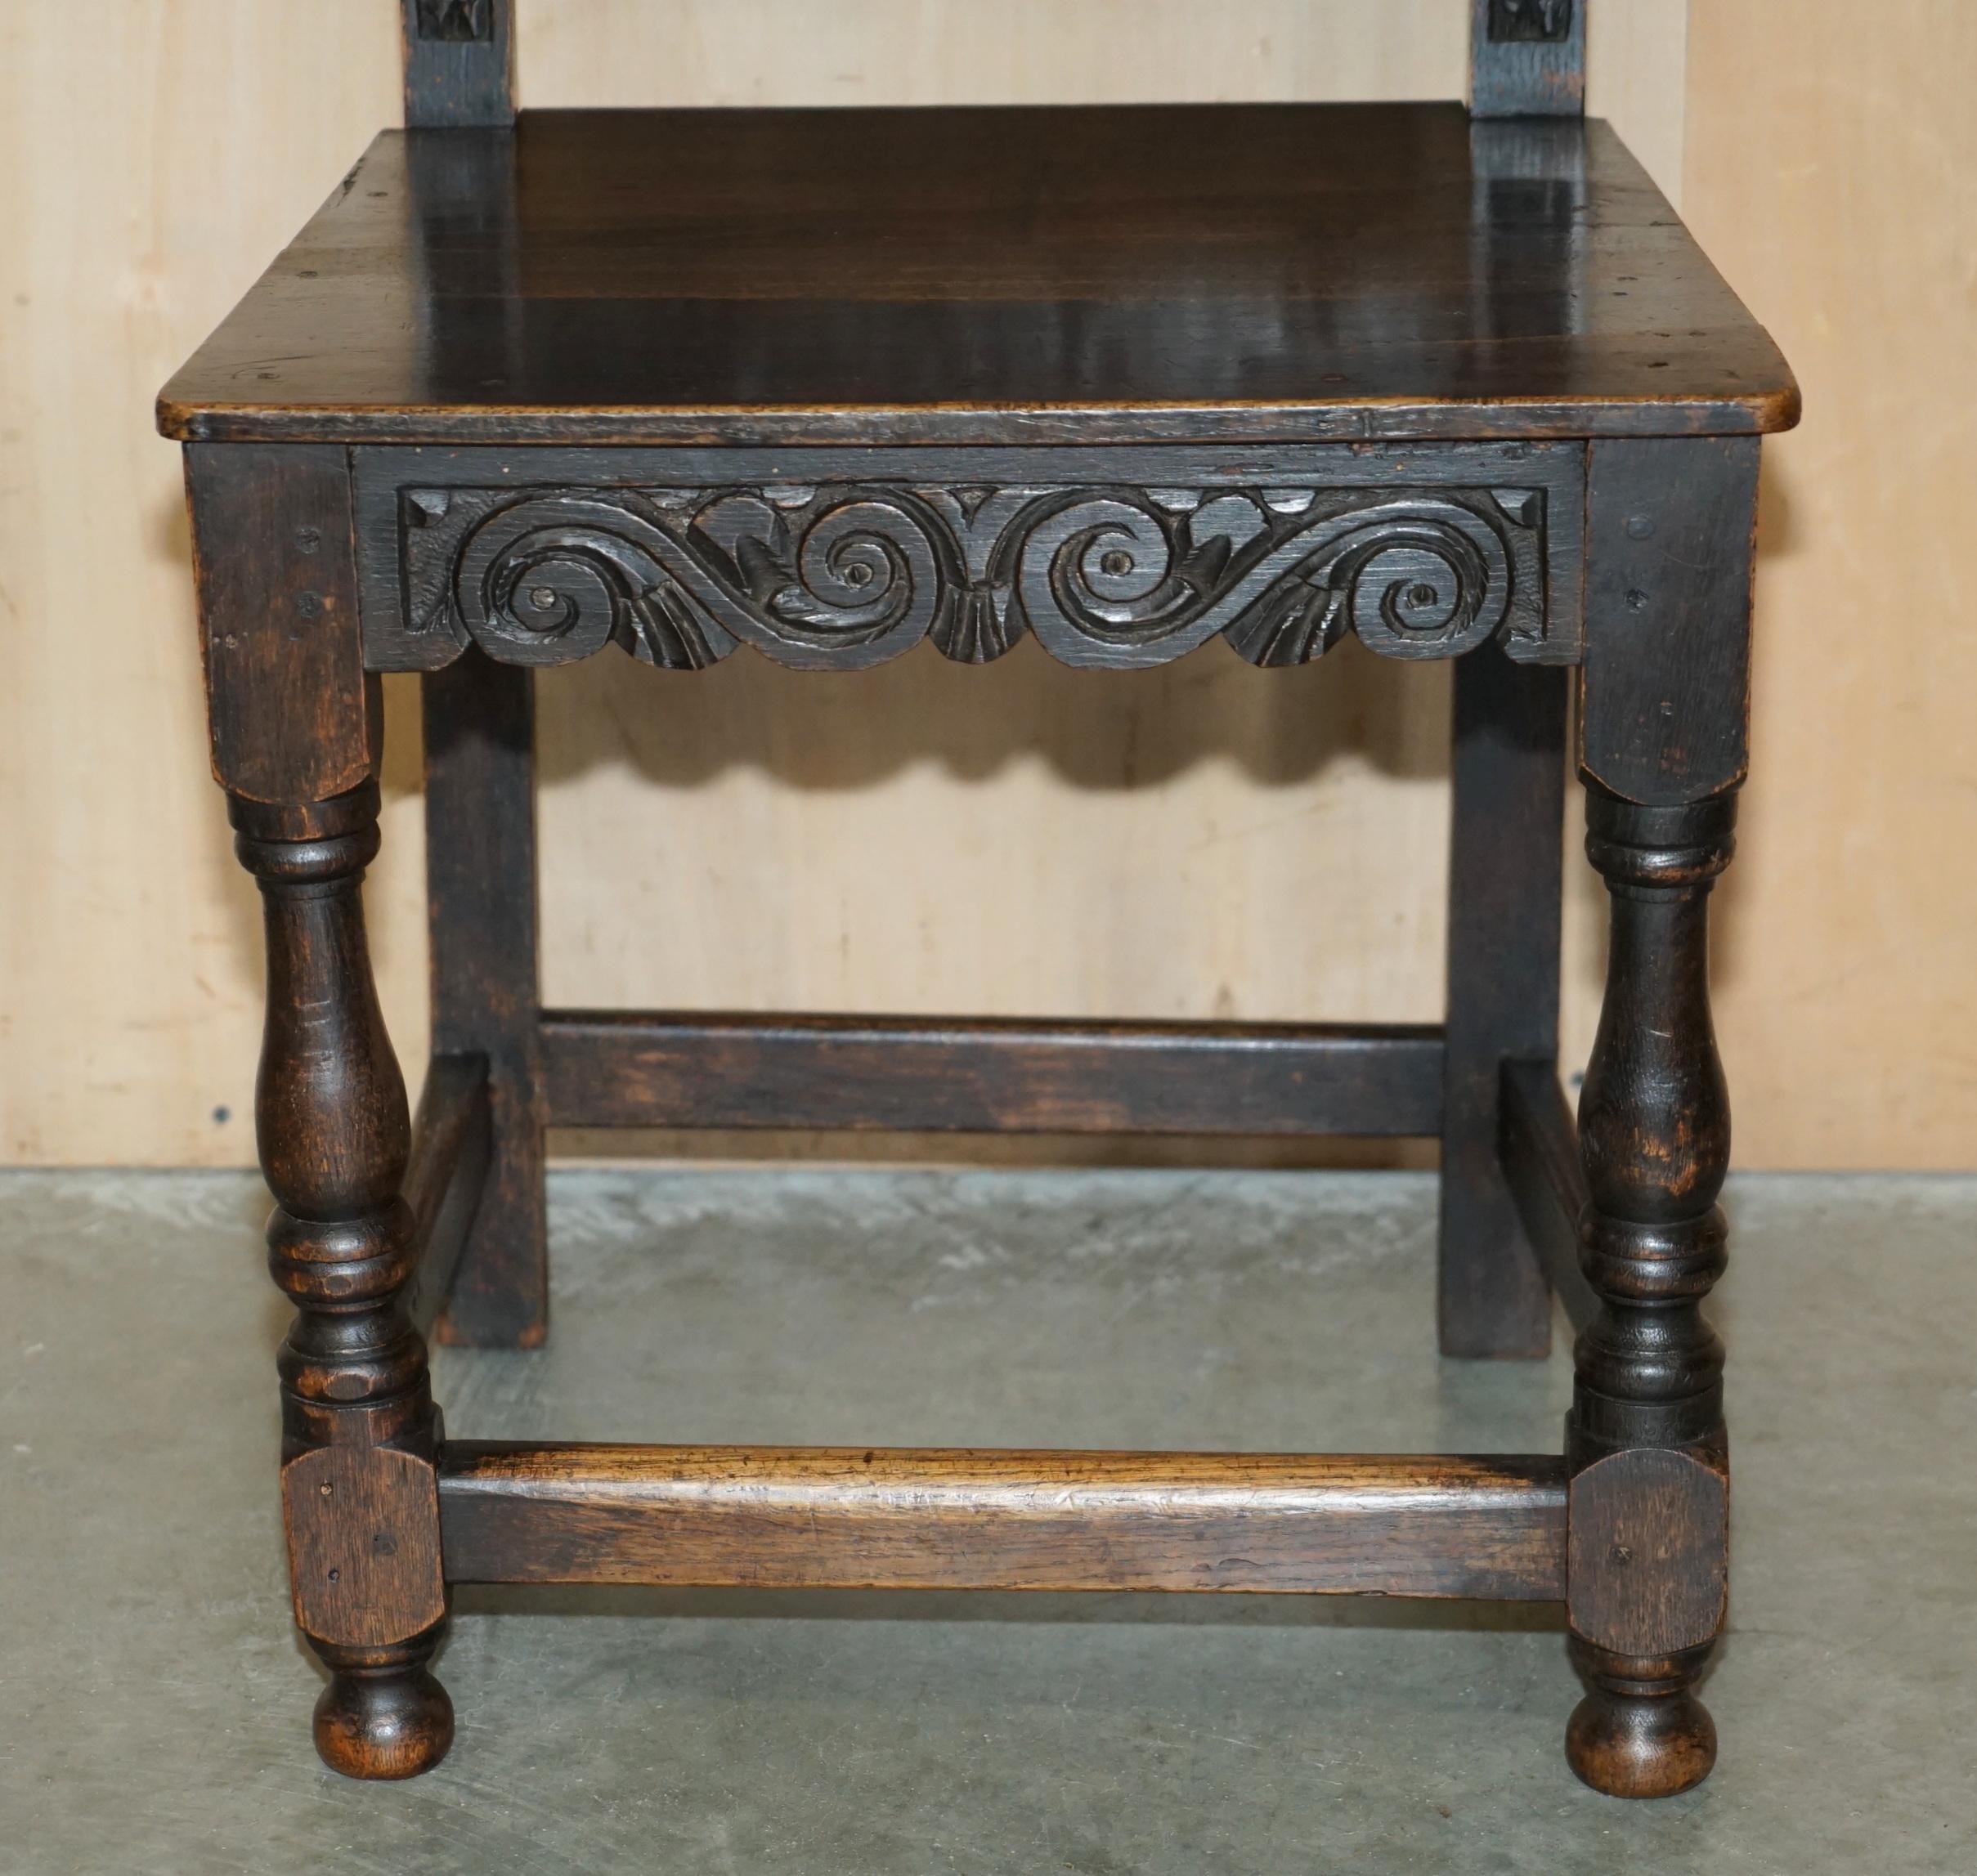 ANTIQUE PAIR OF 17TH CENTURY JACOBEAN ENGLISH OAK CHAIRS FROM THE FILM HELLBOy im Angebot 2